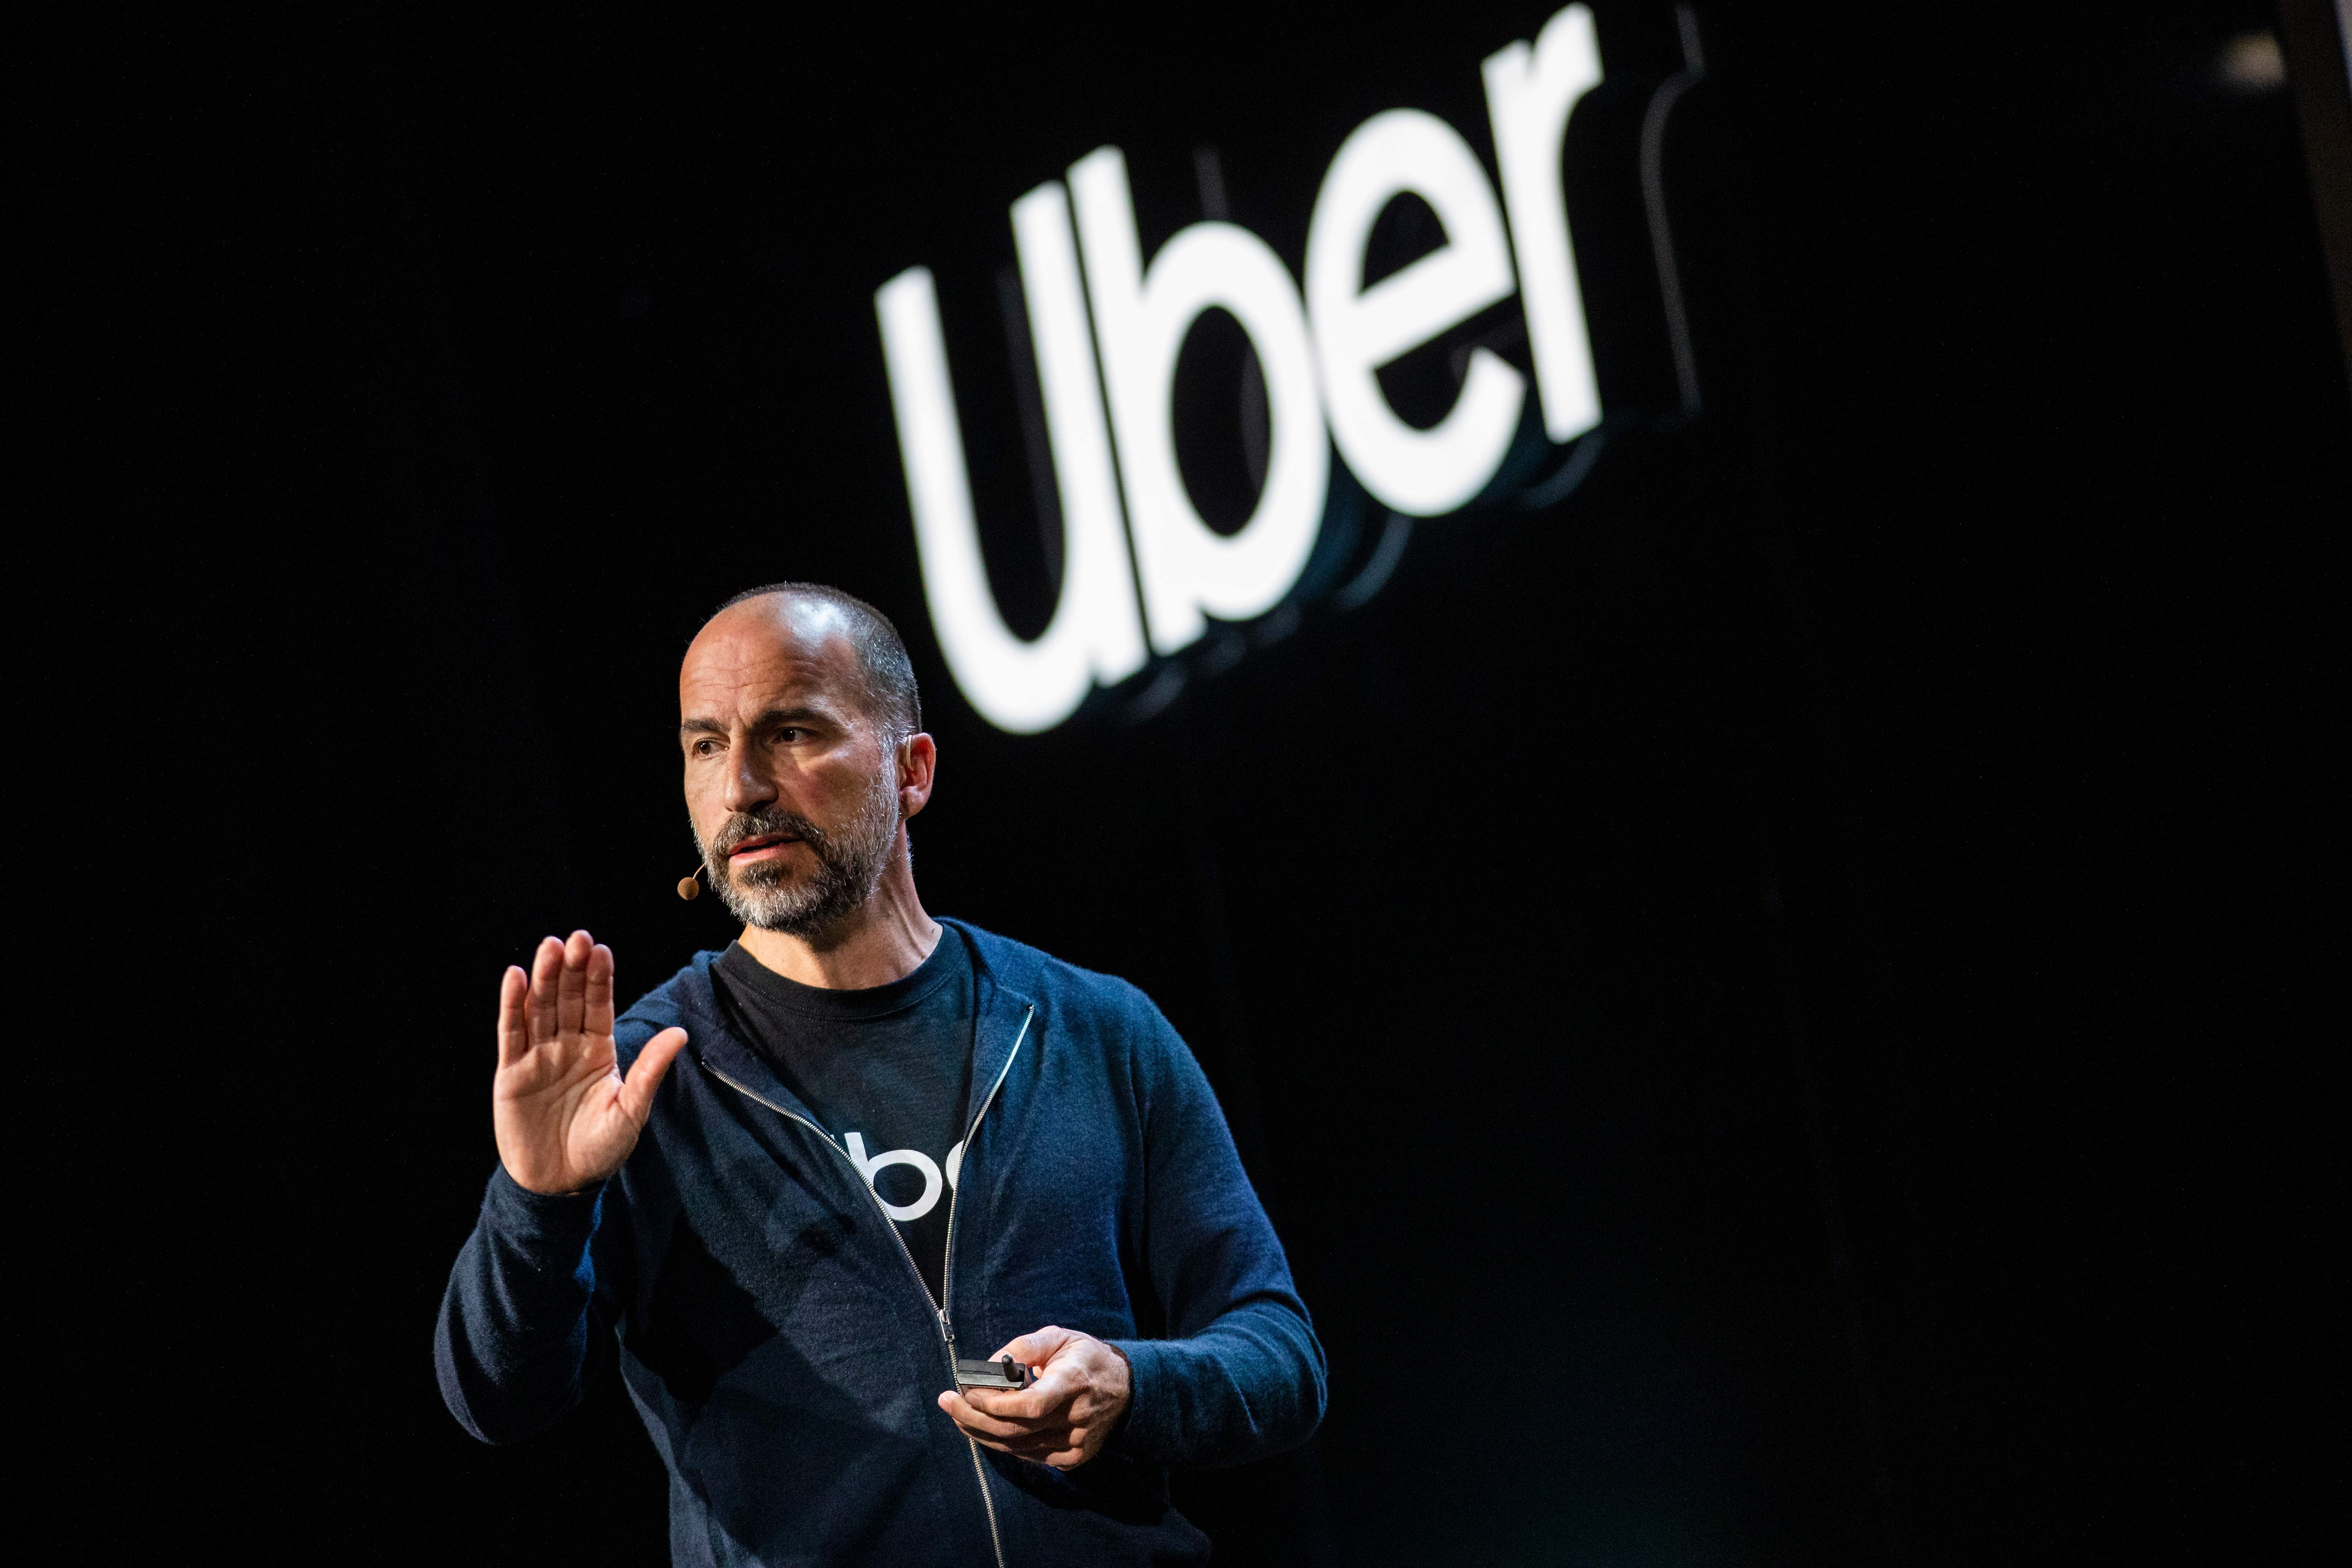 Uber is a top reopening trade with bookings expected to pop 24% this year, Jefferies says